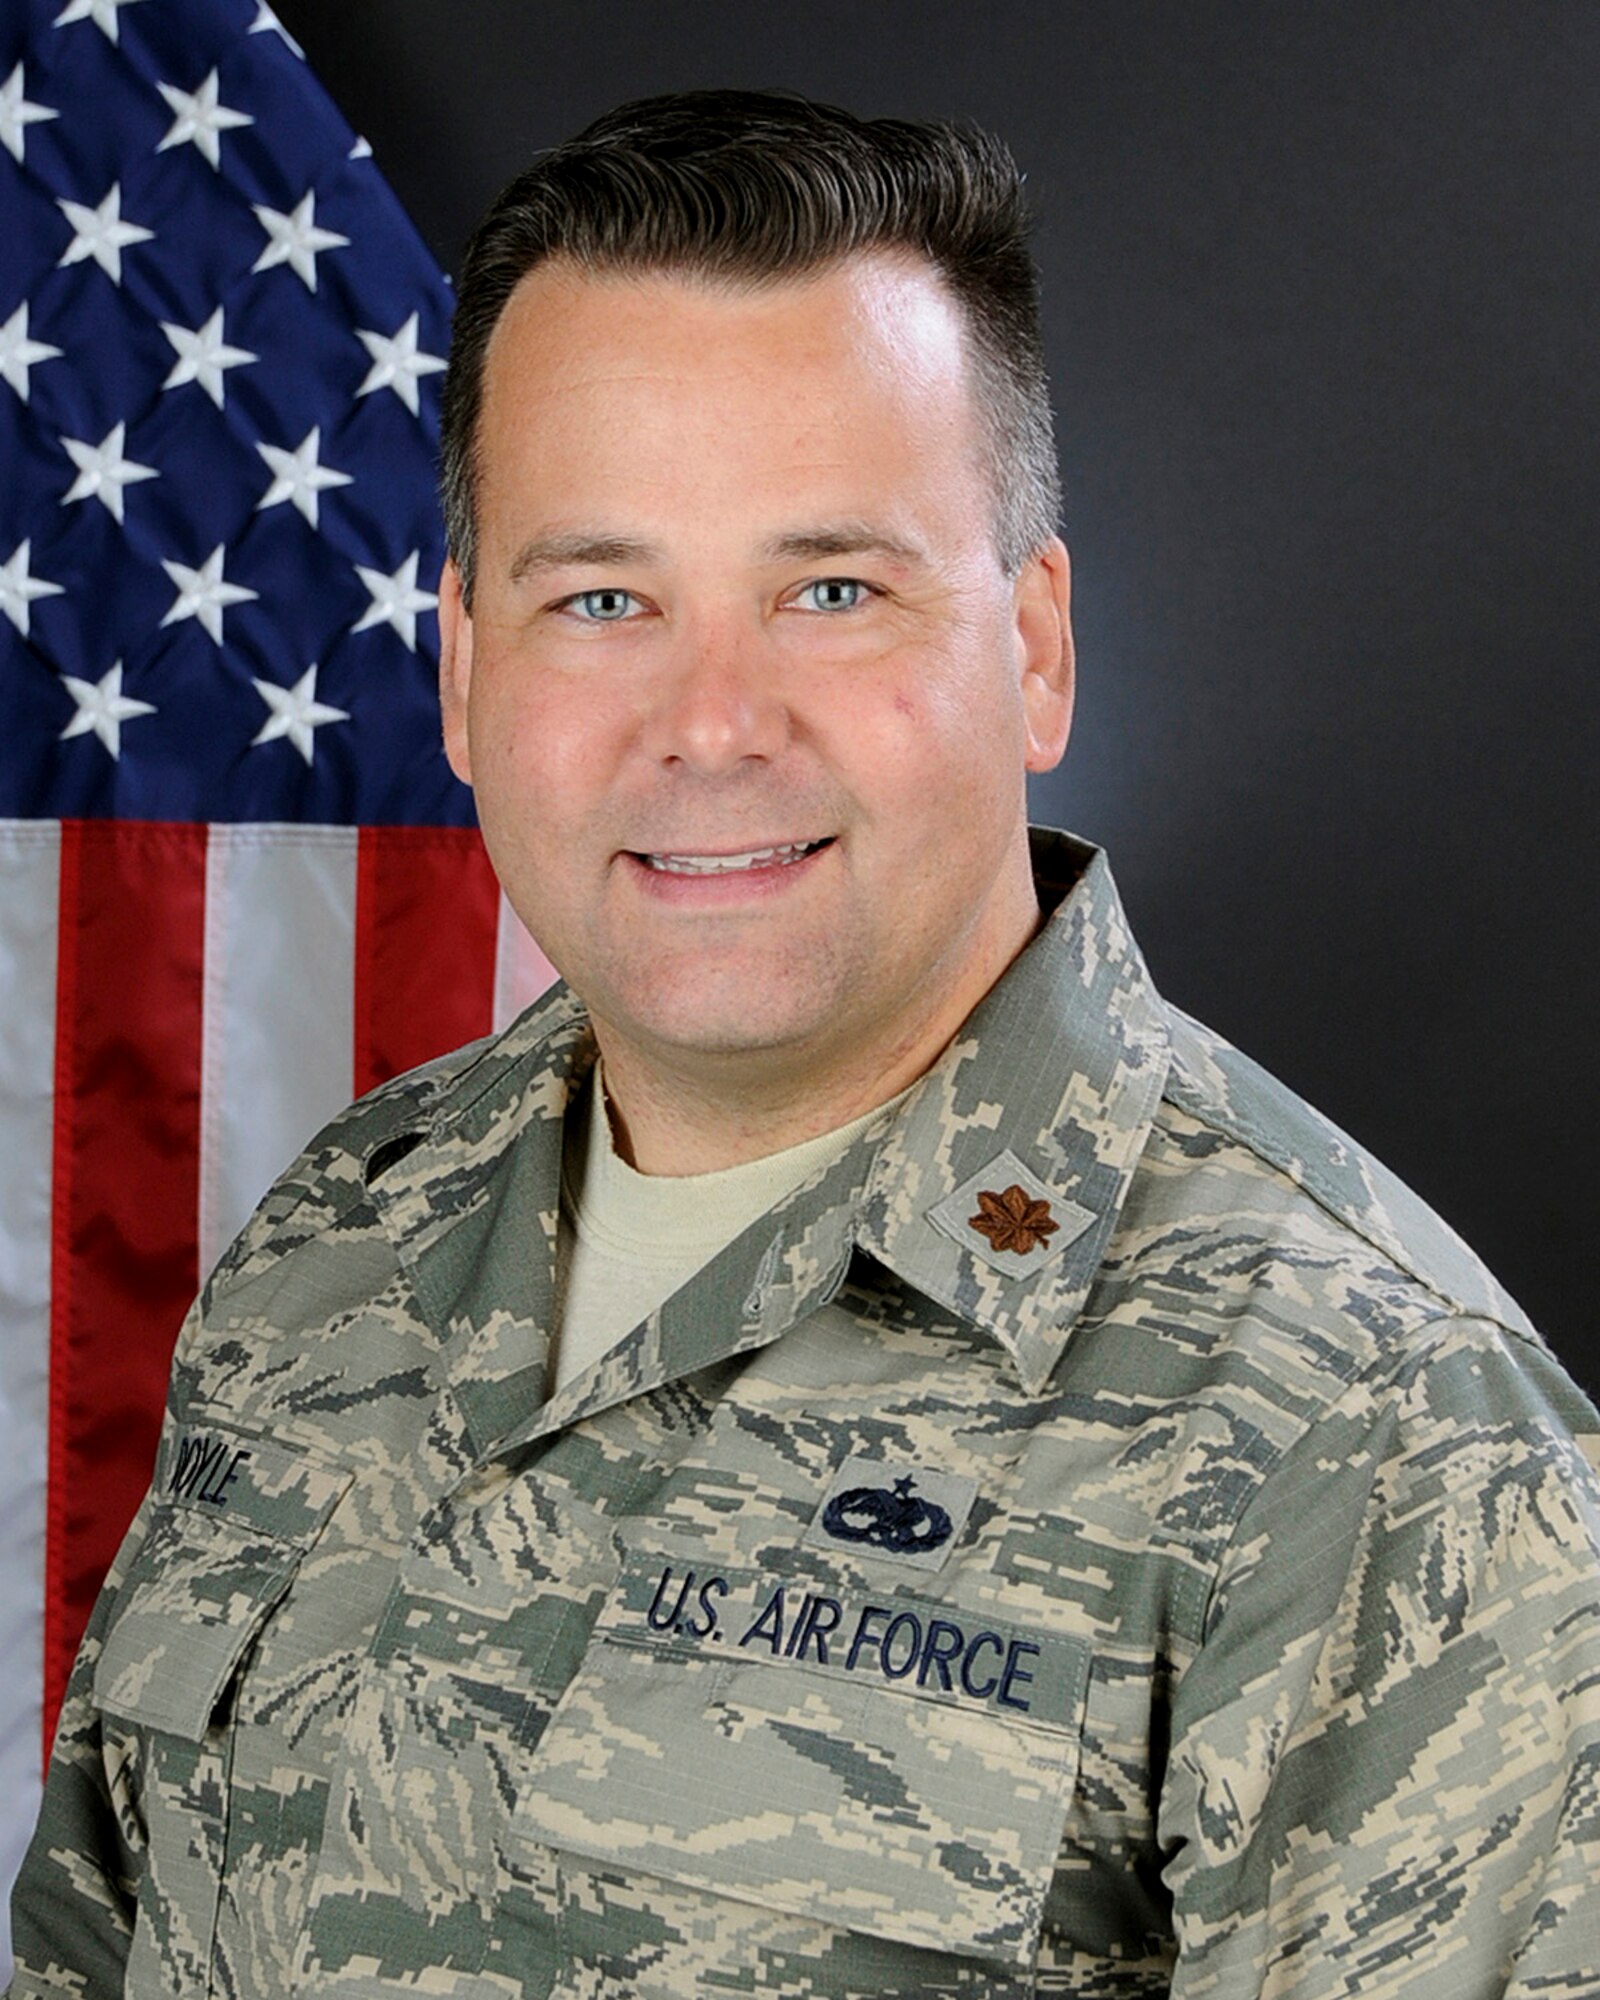 U.S. Air Force Maj. Brian Doyle, commander of the 169th Maintenance Operations Flight, South Carolina Air National Guard at McEntire Joint National Guard Base, April 24, 2015.  (U.S. Air National Guard photo by Tech. Sgt. Caycee Watson/Released)